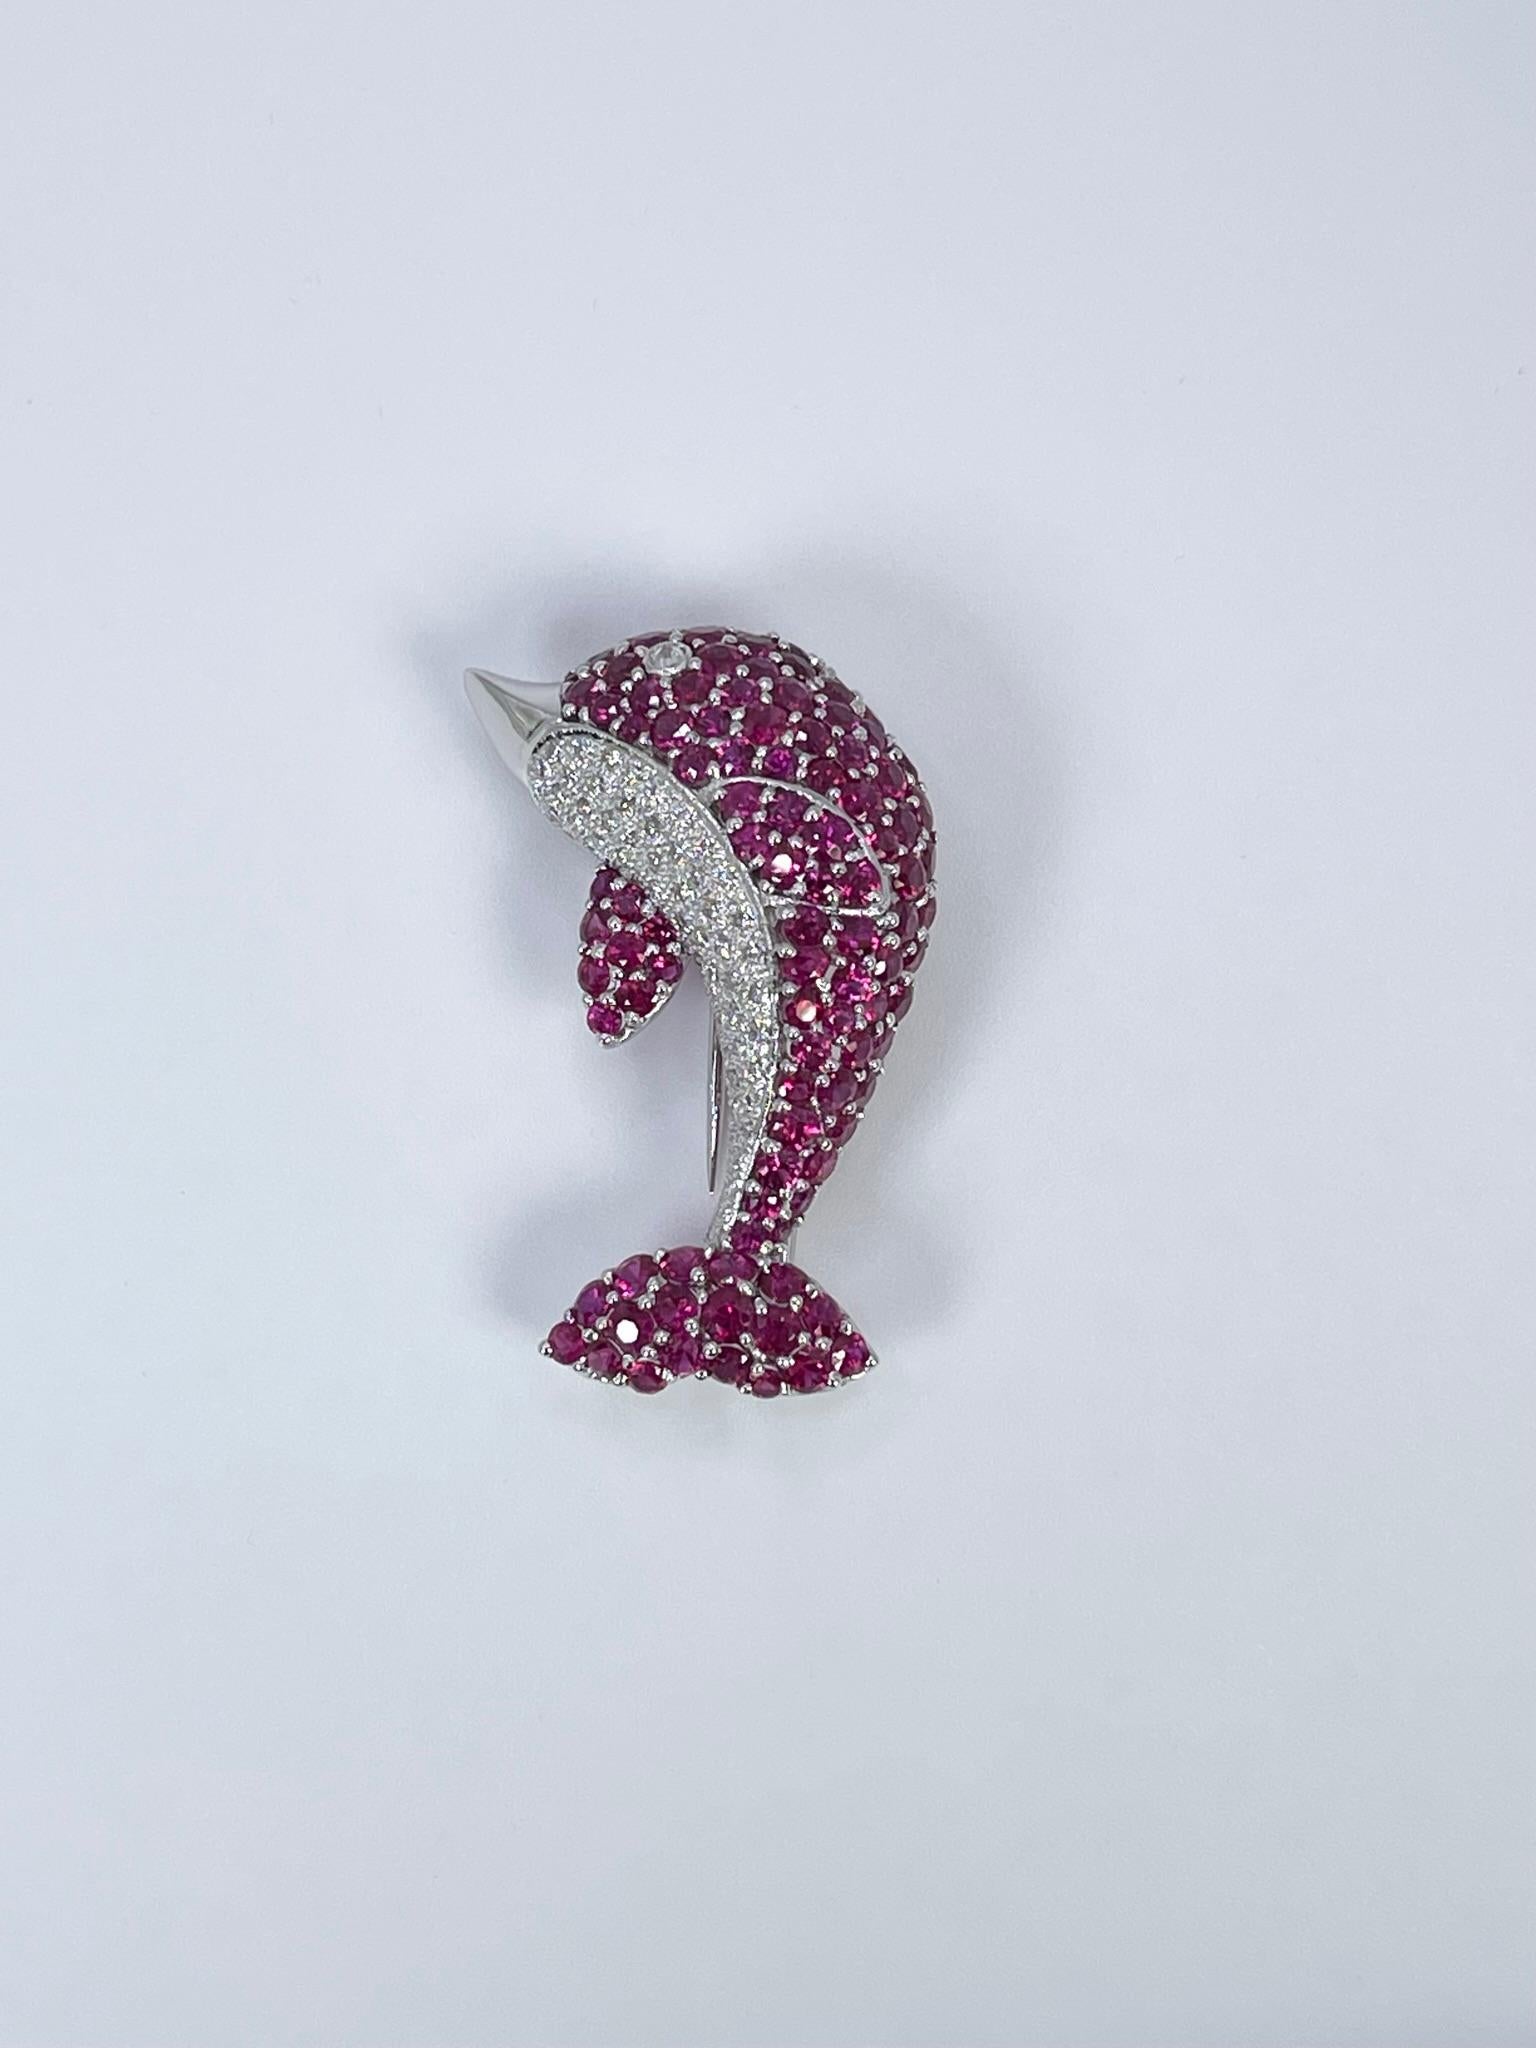 Modern Dolphin Diamond Brooch 18KT White Gold Natural Rubies For Sale